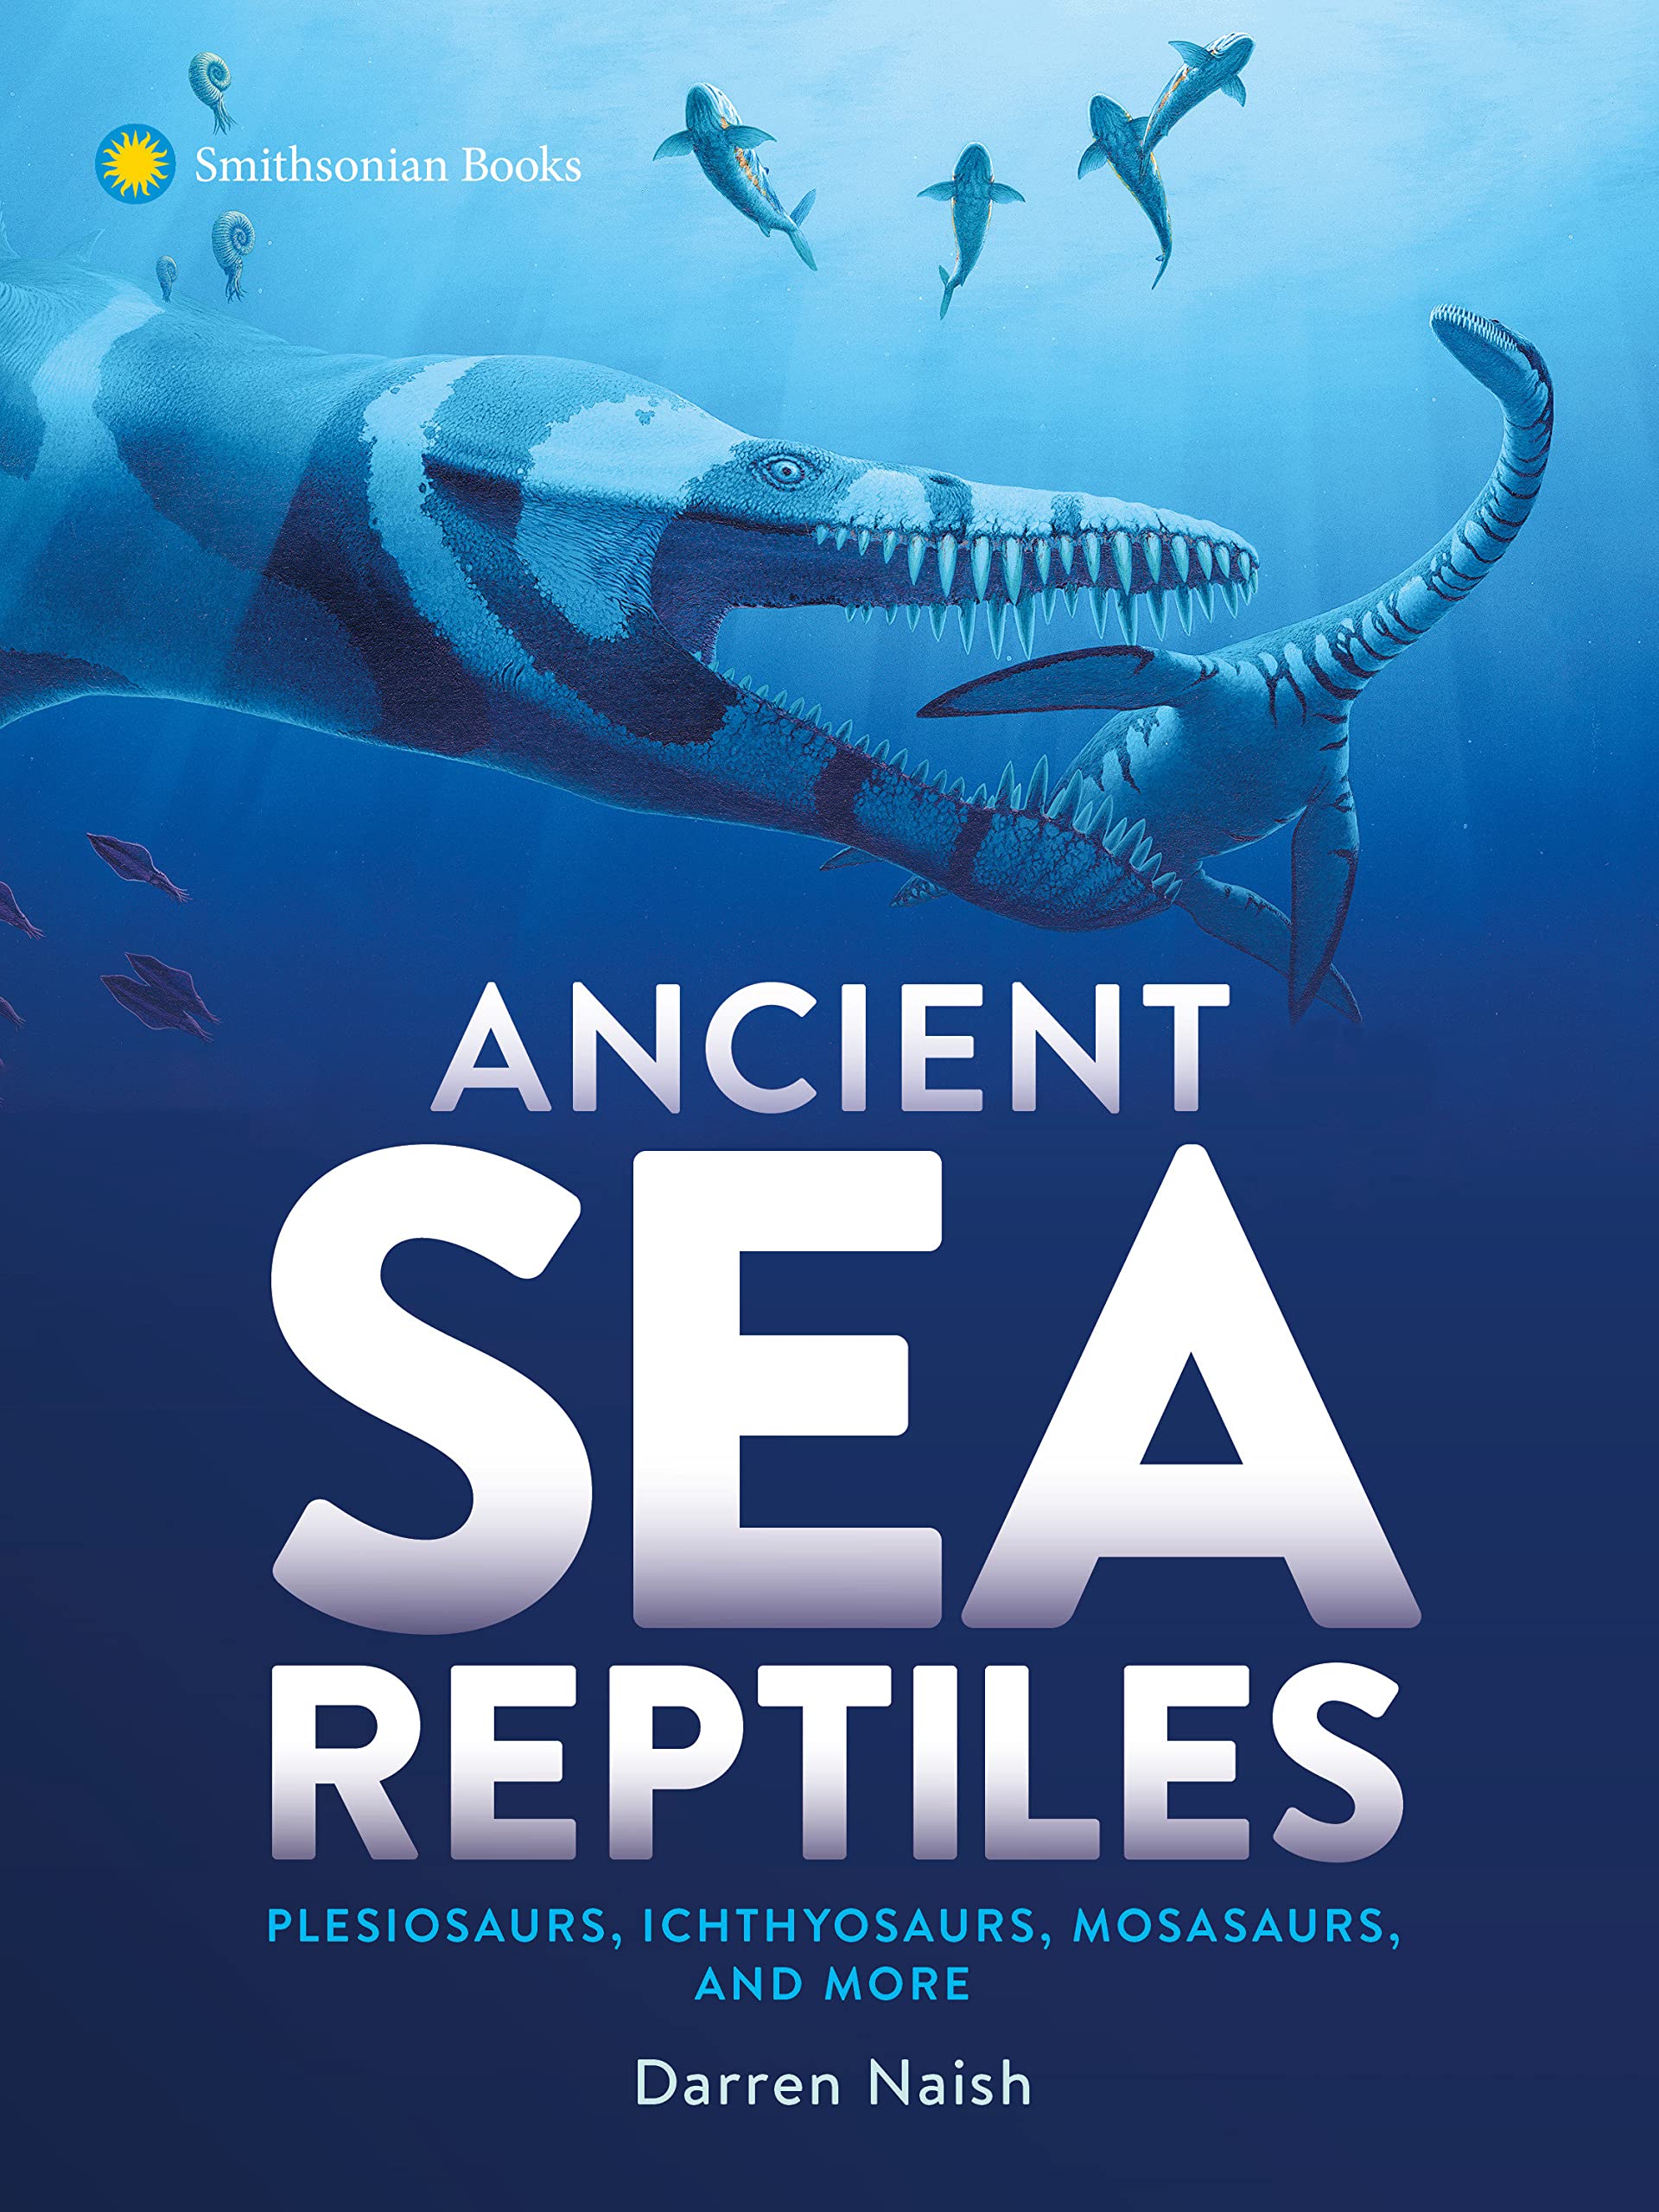 Ancient sea reptiles : plesiosaurs, ichthyosaurs, mosasaurs, and more